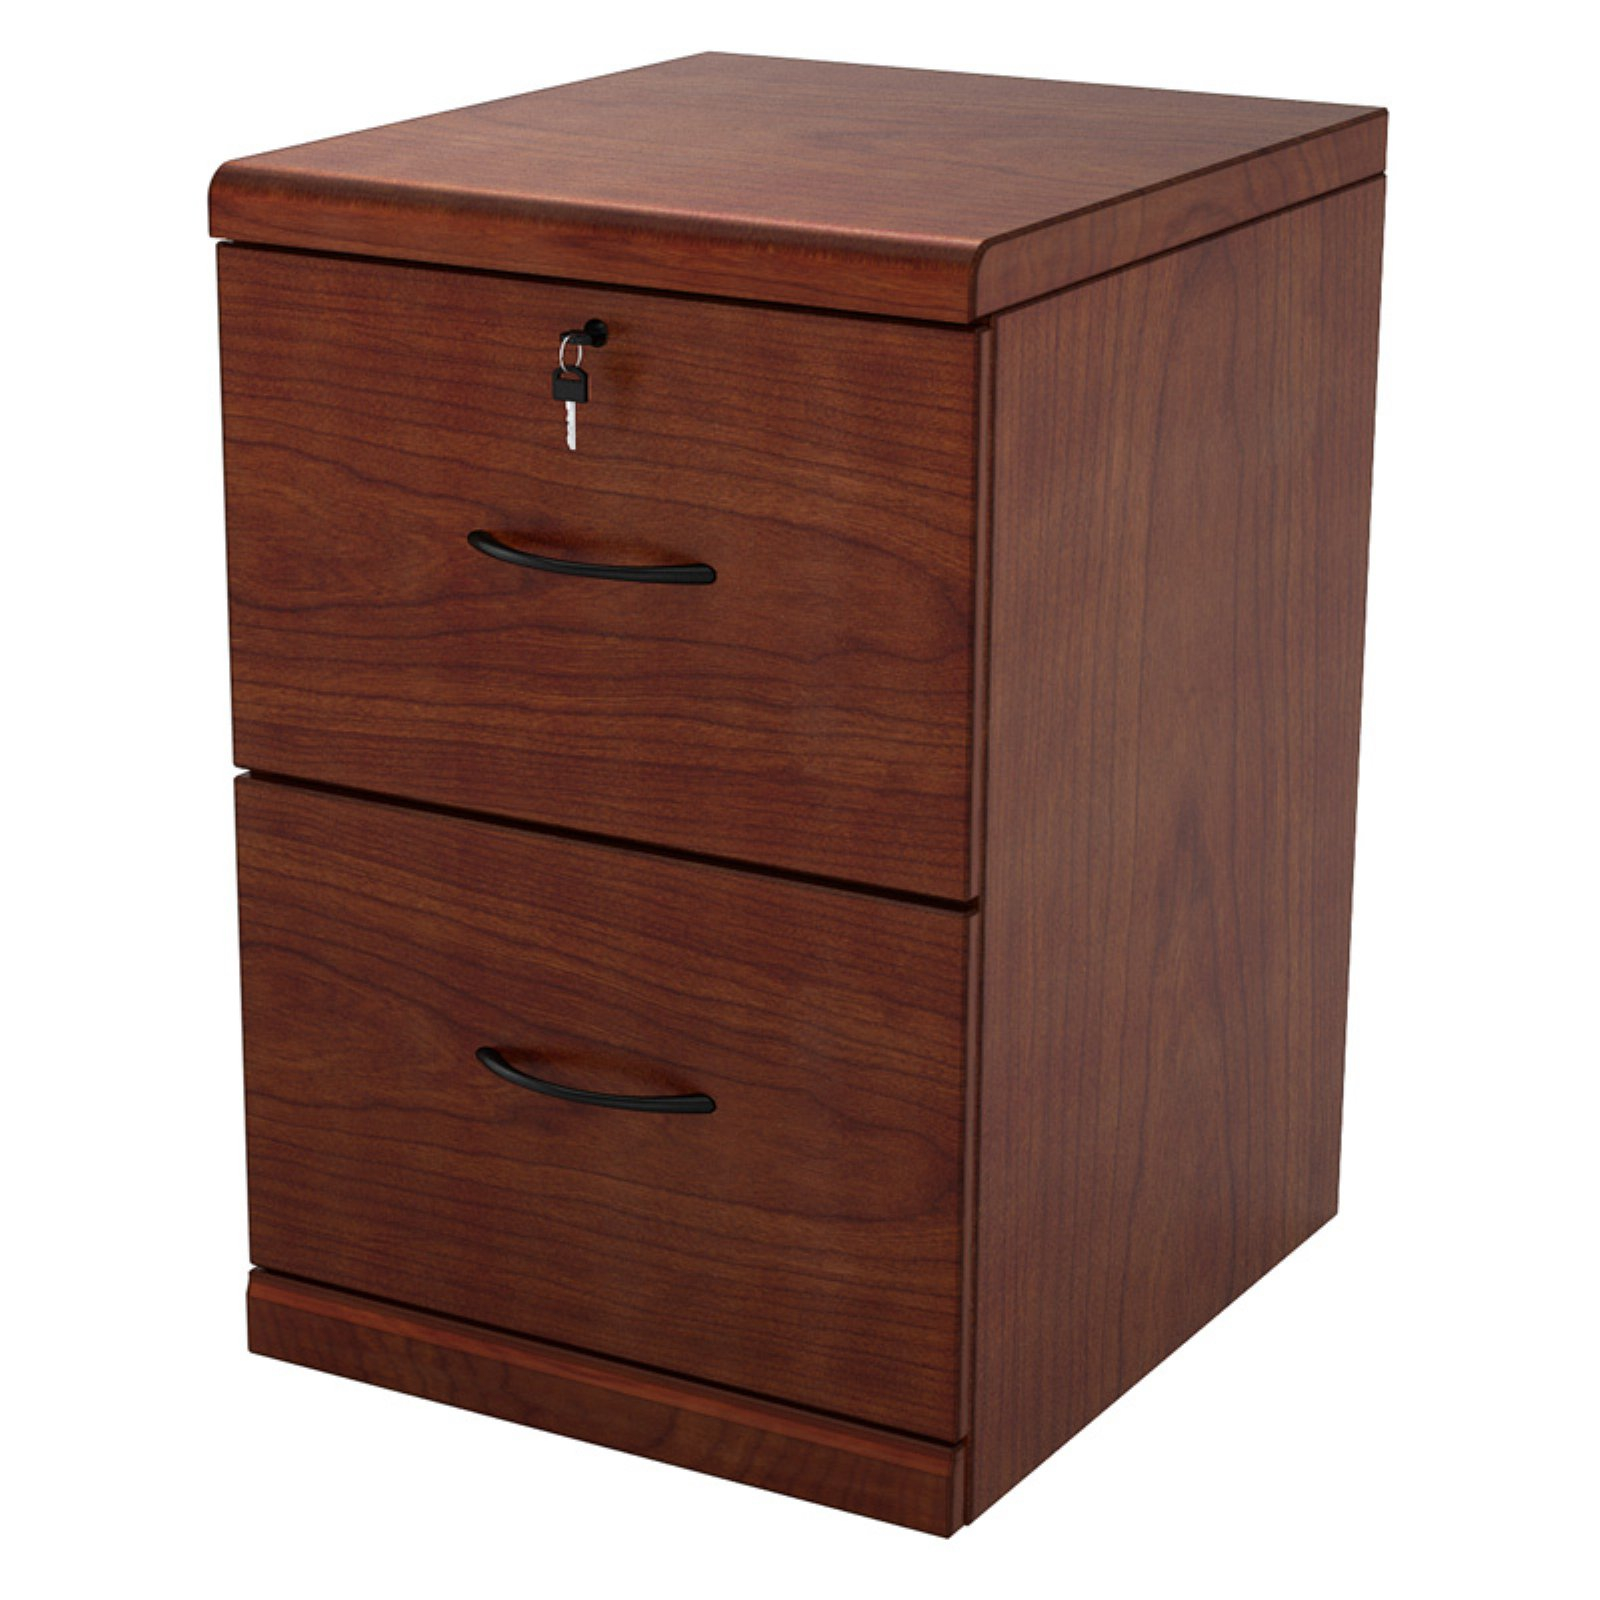 2 Drawer Vertical Wood Lockable Filing Cabinet Cherry Walmart intended for size 1600 X 1600